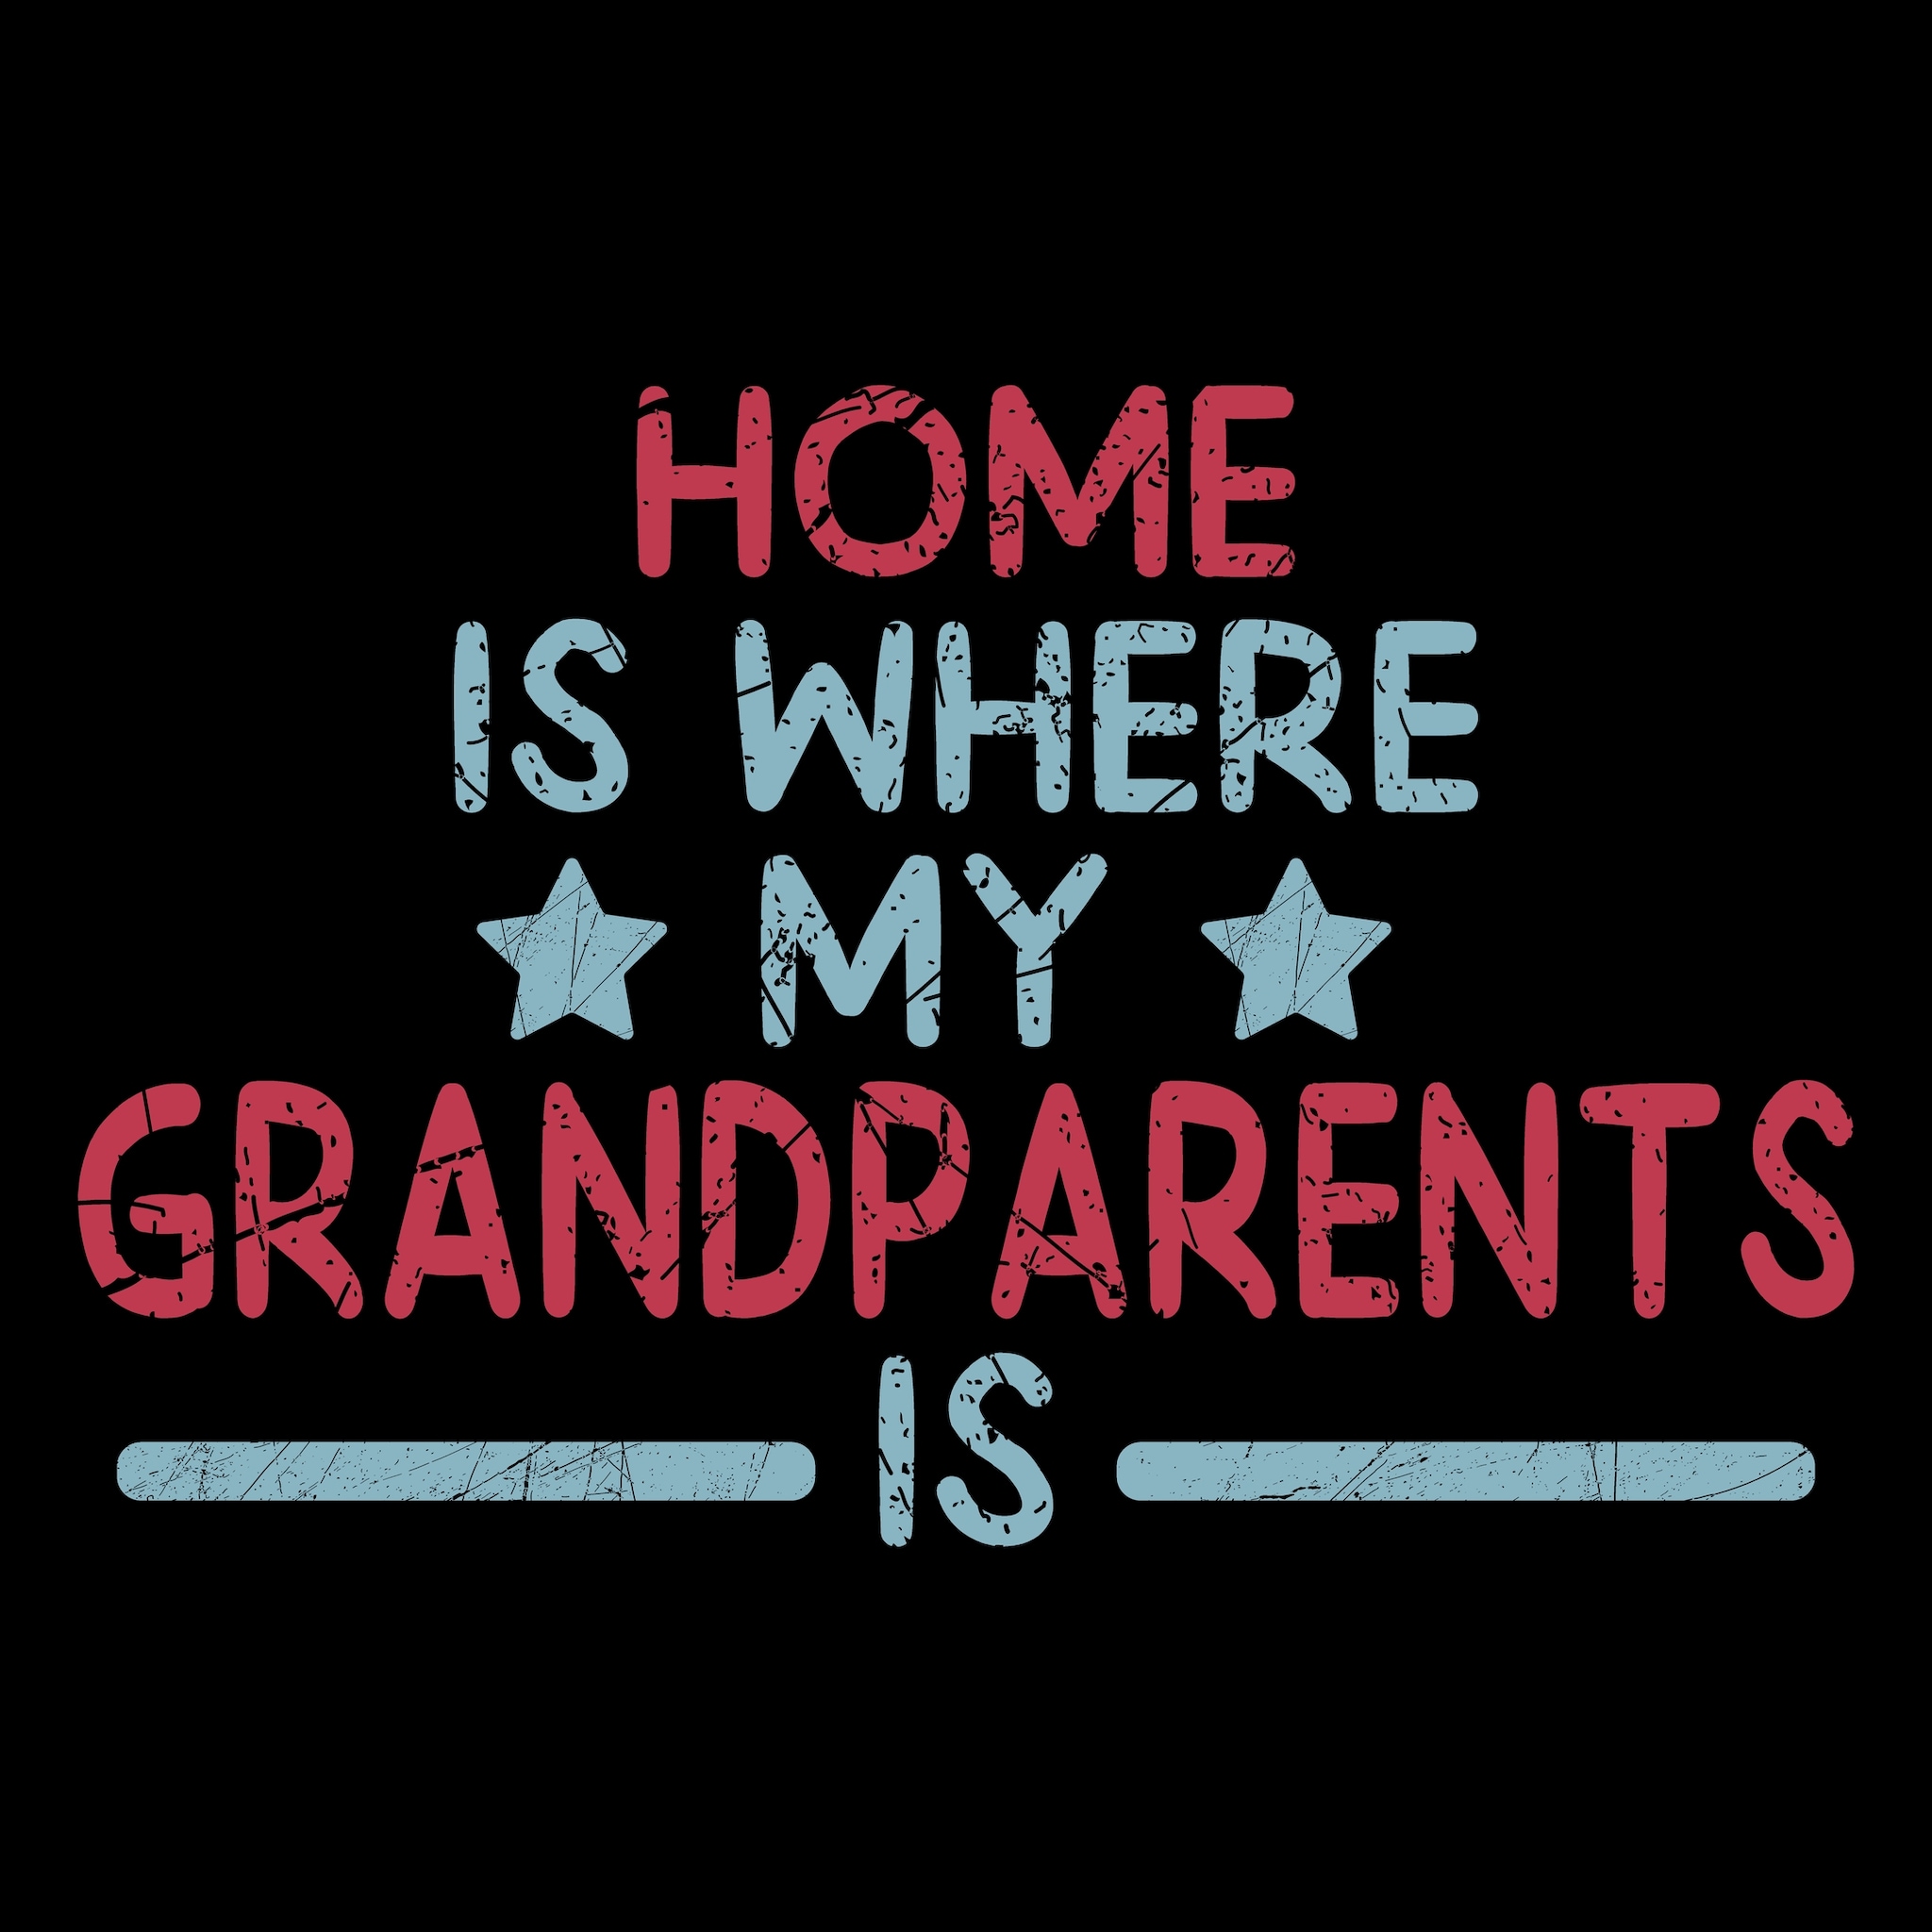 Happy Grandparents' Day 2022: Images, Wishes, Quotes, Messages And ...